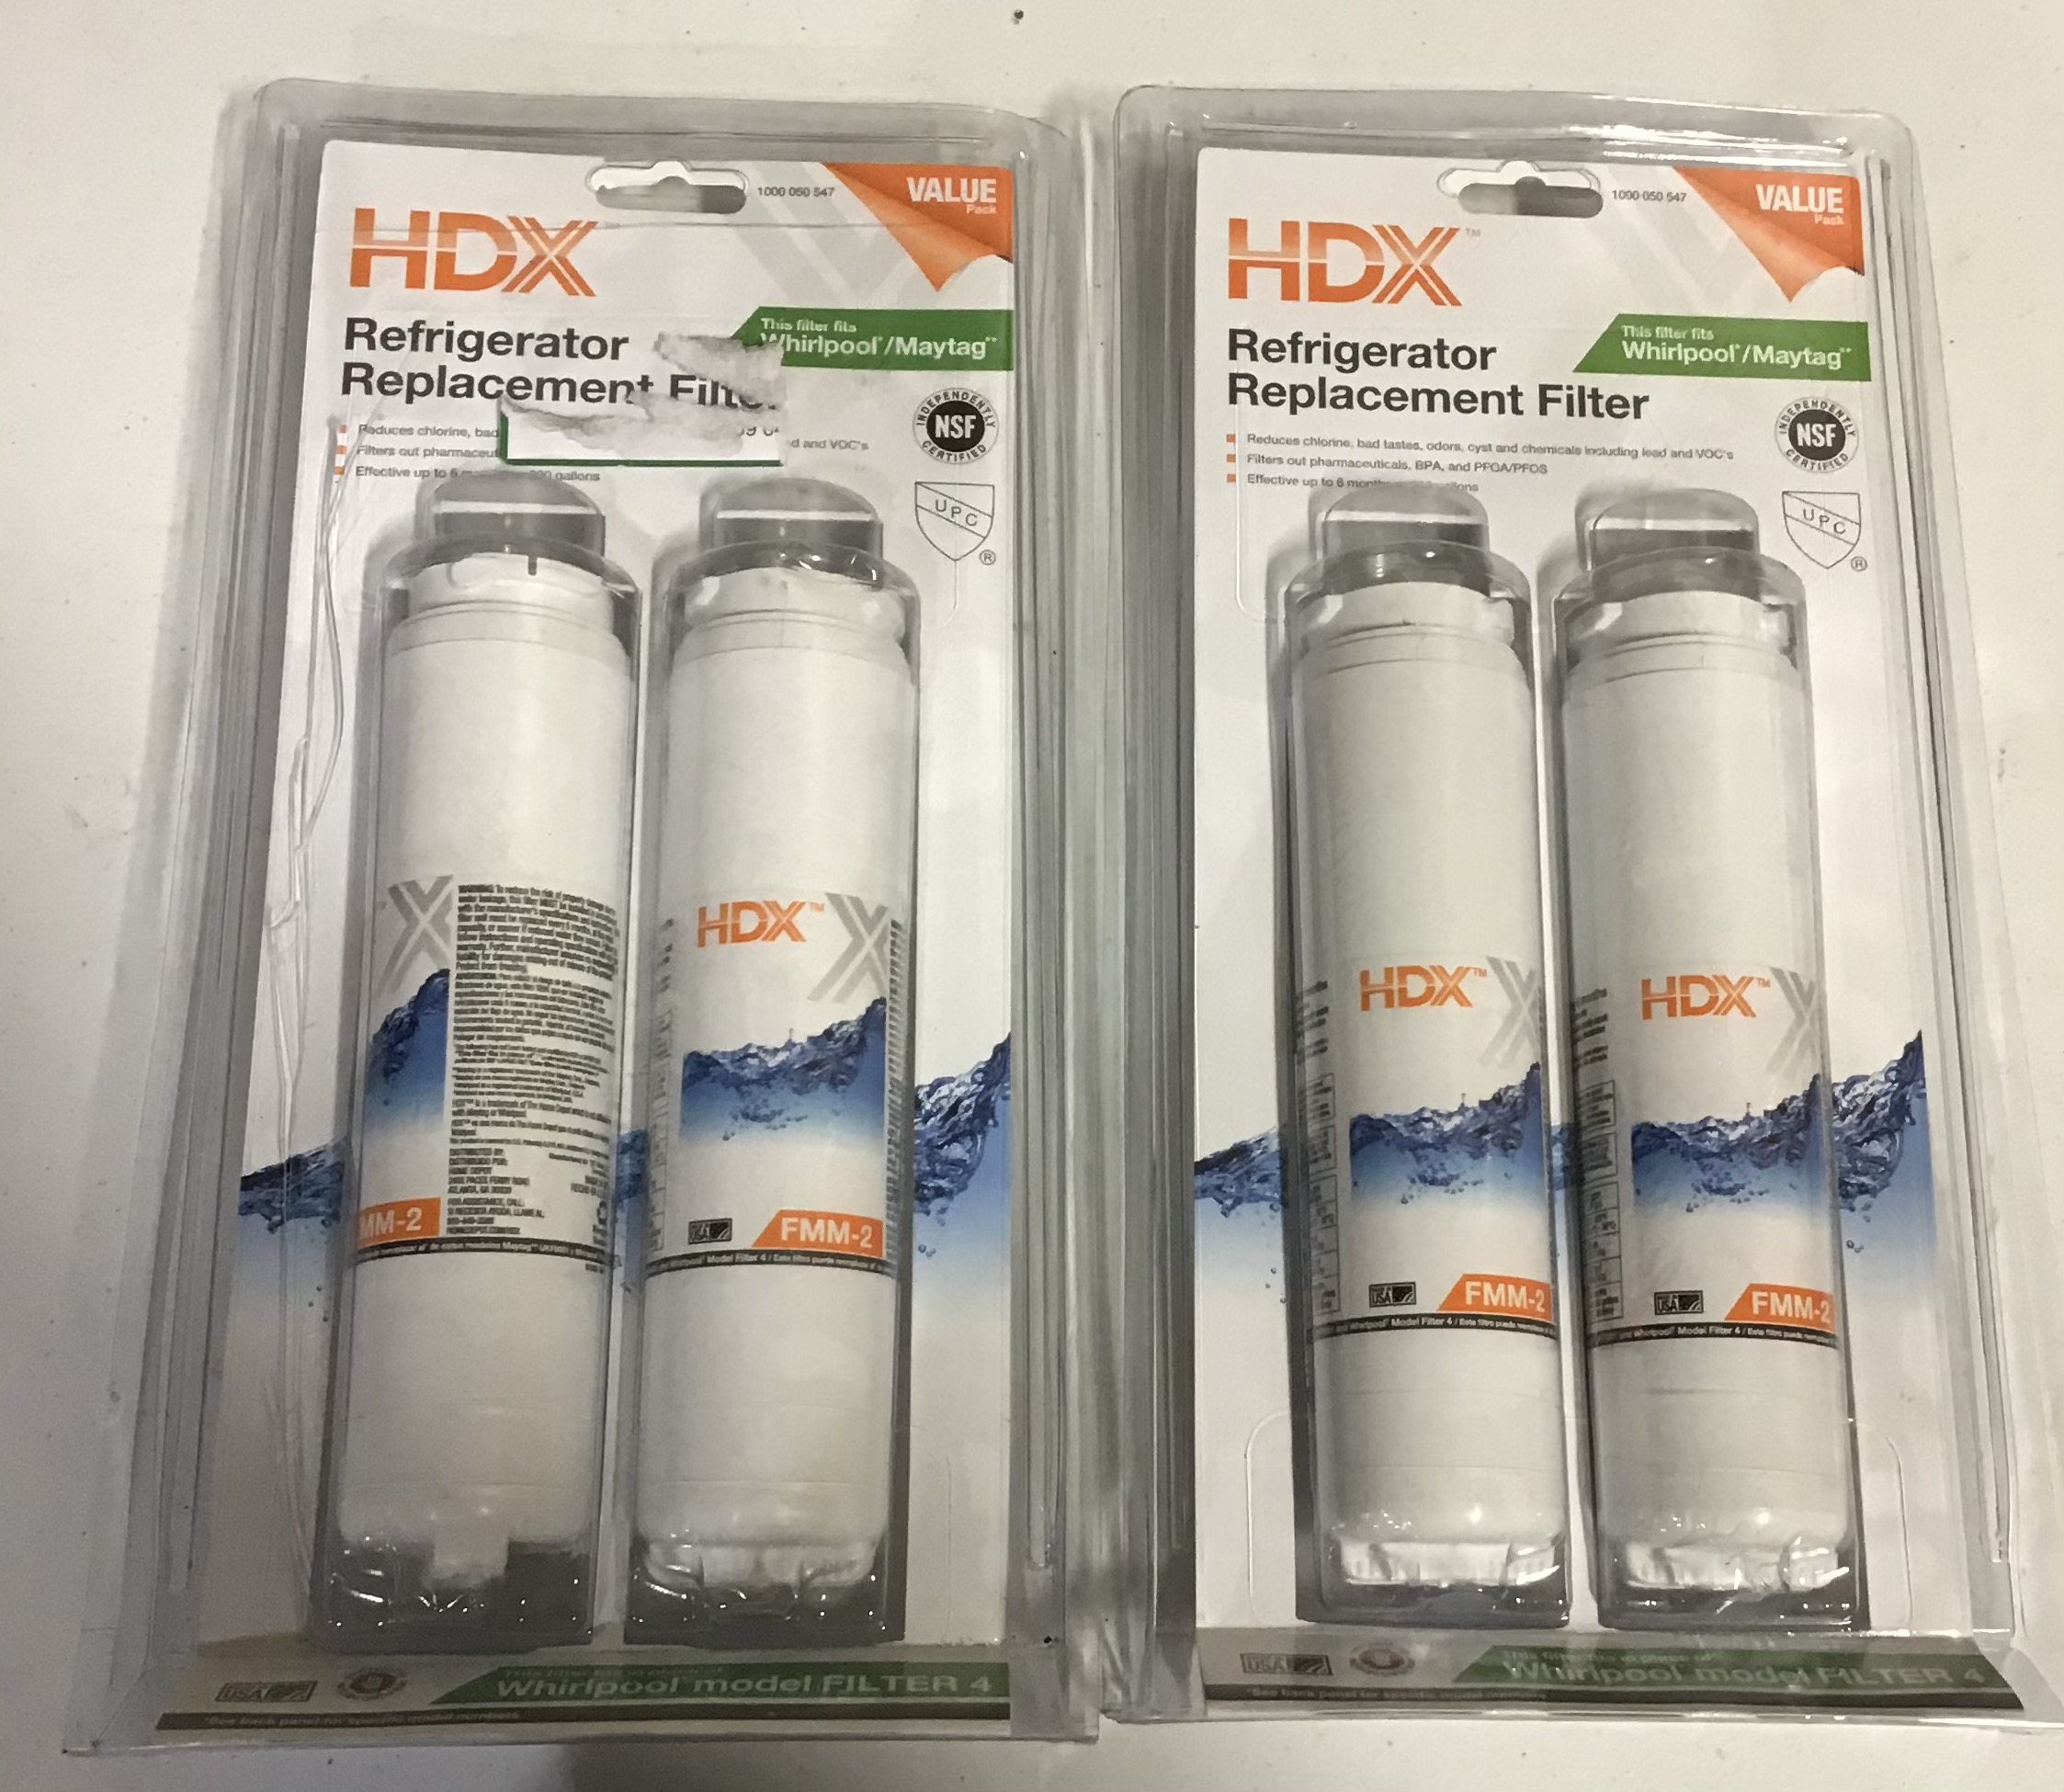 2 Pack Purifier for Samsung Refrigerators HDX FMS-1 Replacement Water Filter